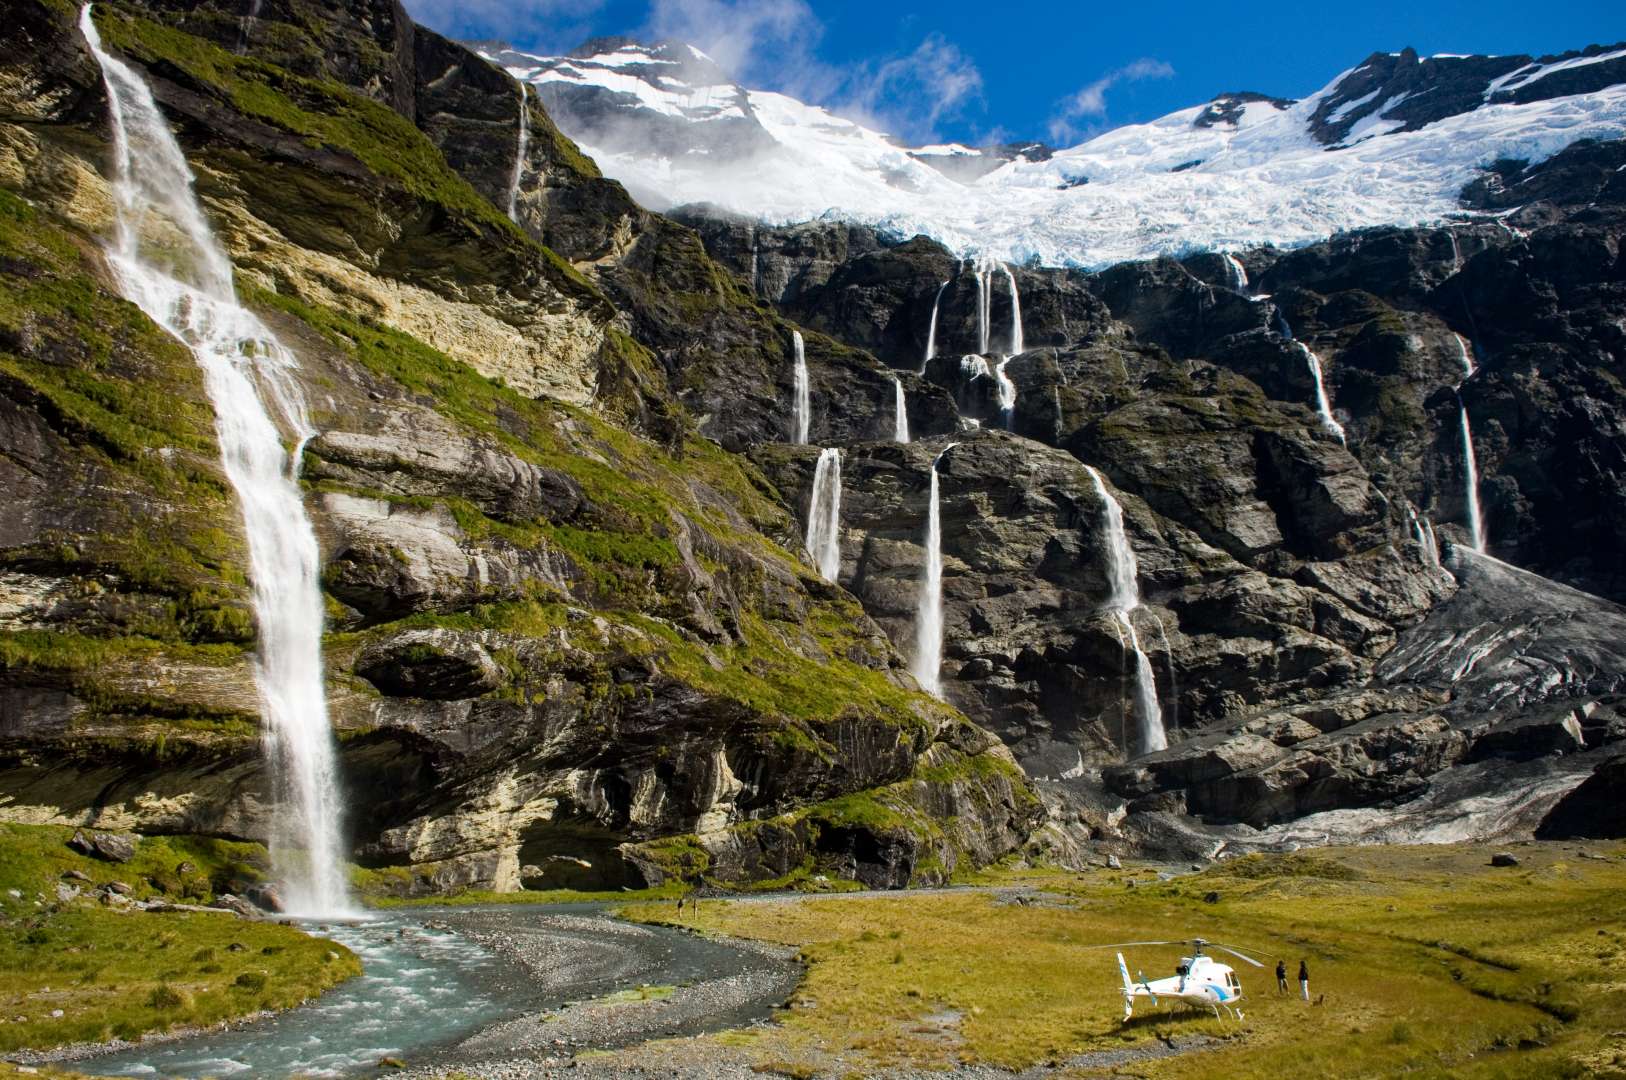 Heli trip with Middle Earth Waterfalls